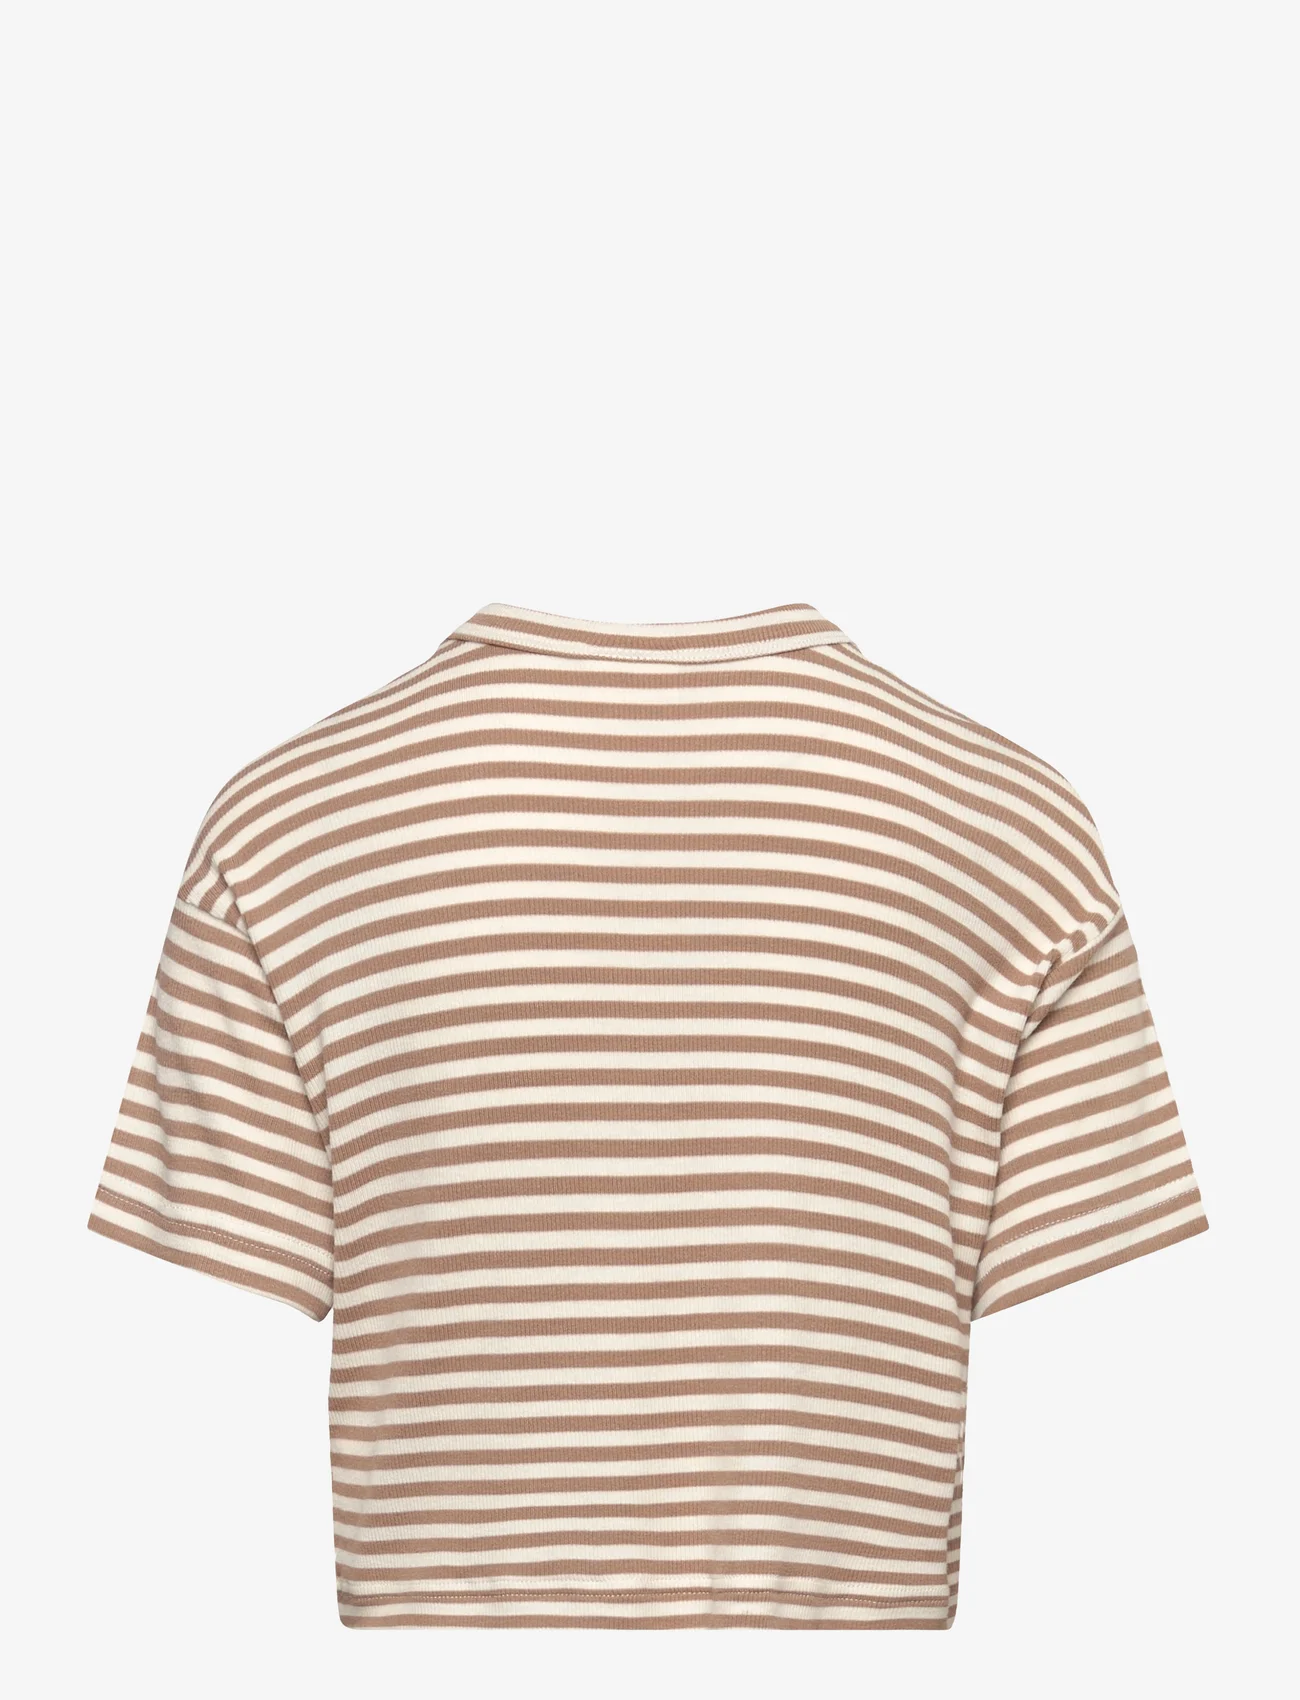 Sofie Schnoor Young - T-shirt - short-sleeved t-shirts - beige striped - 1